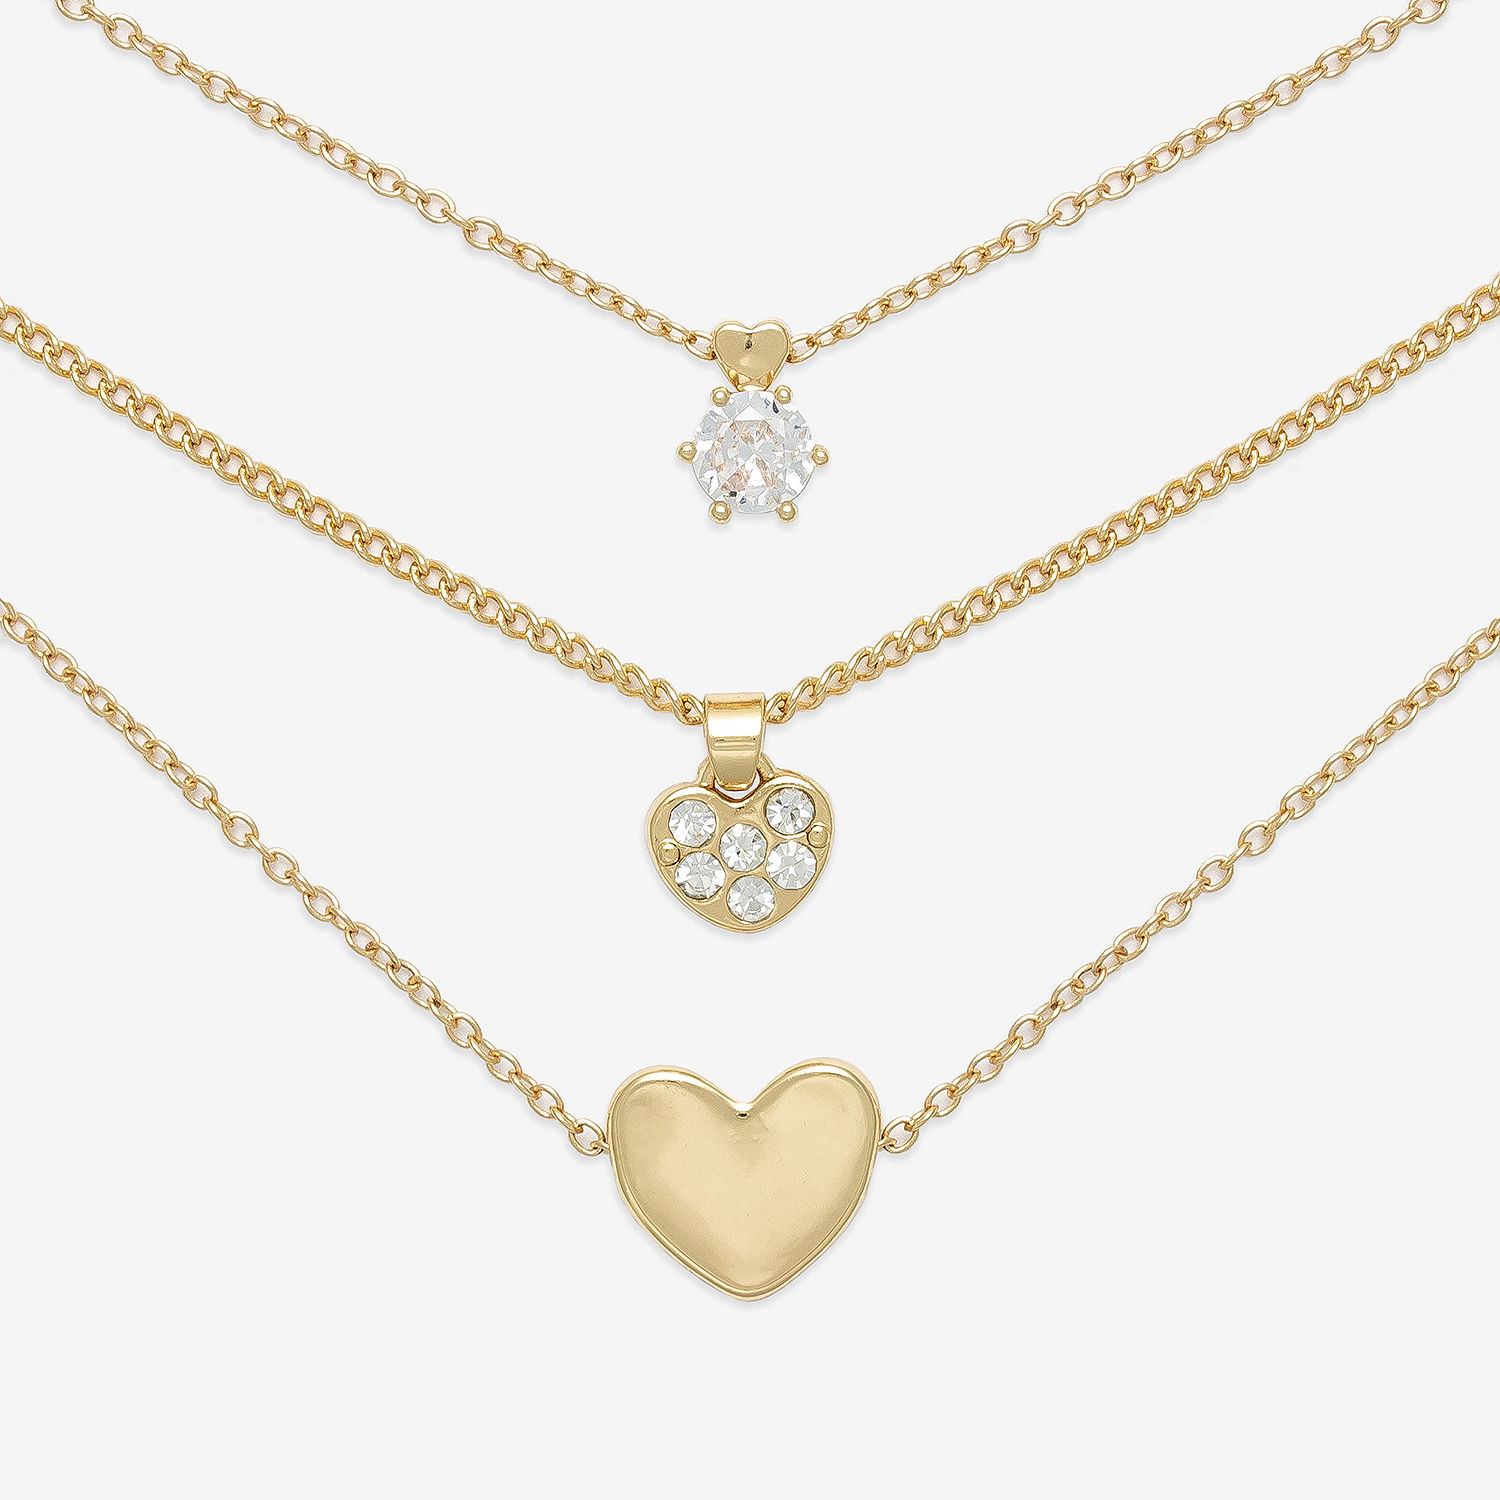 Mixit Hypoallergenic 3-pc. Heart Jewelry Set, Color: Goldtone - JCPenney